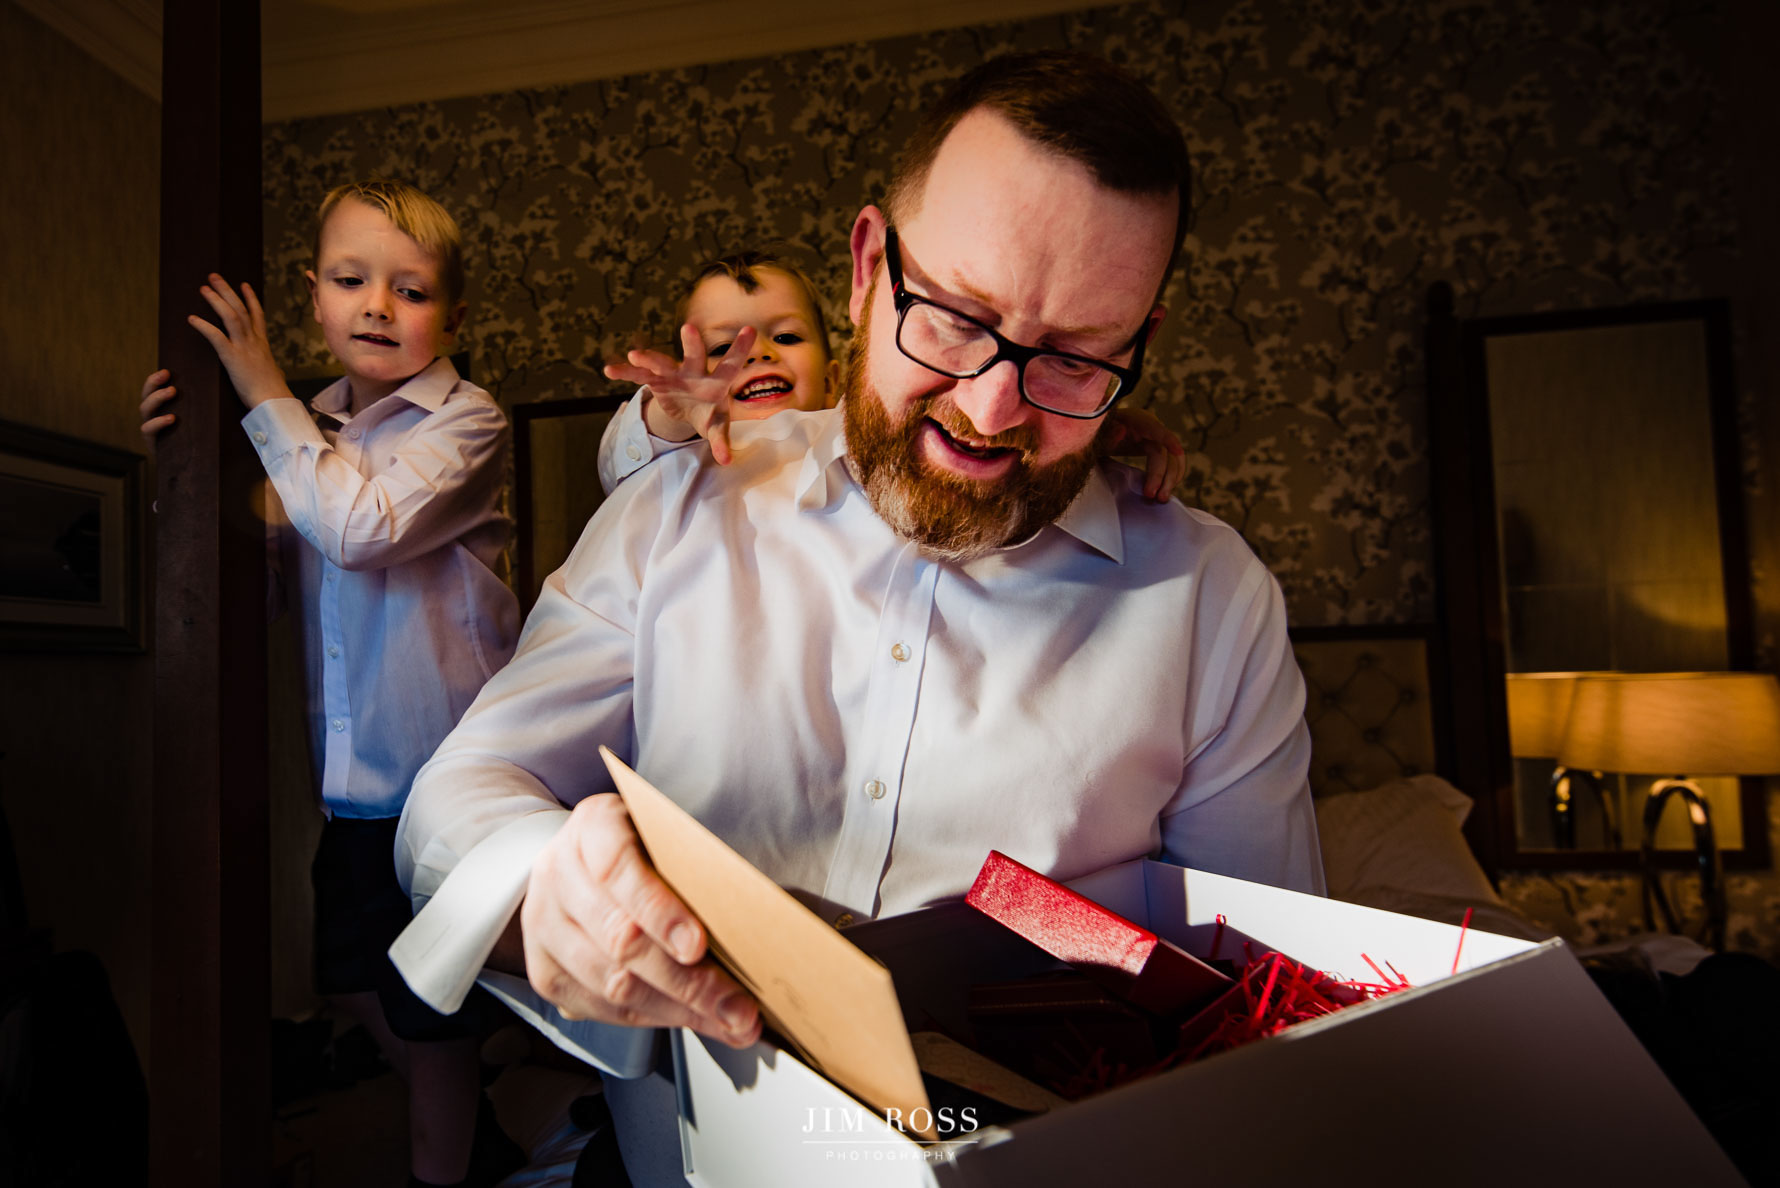 gift from bride to groom with excited boys looking on